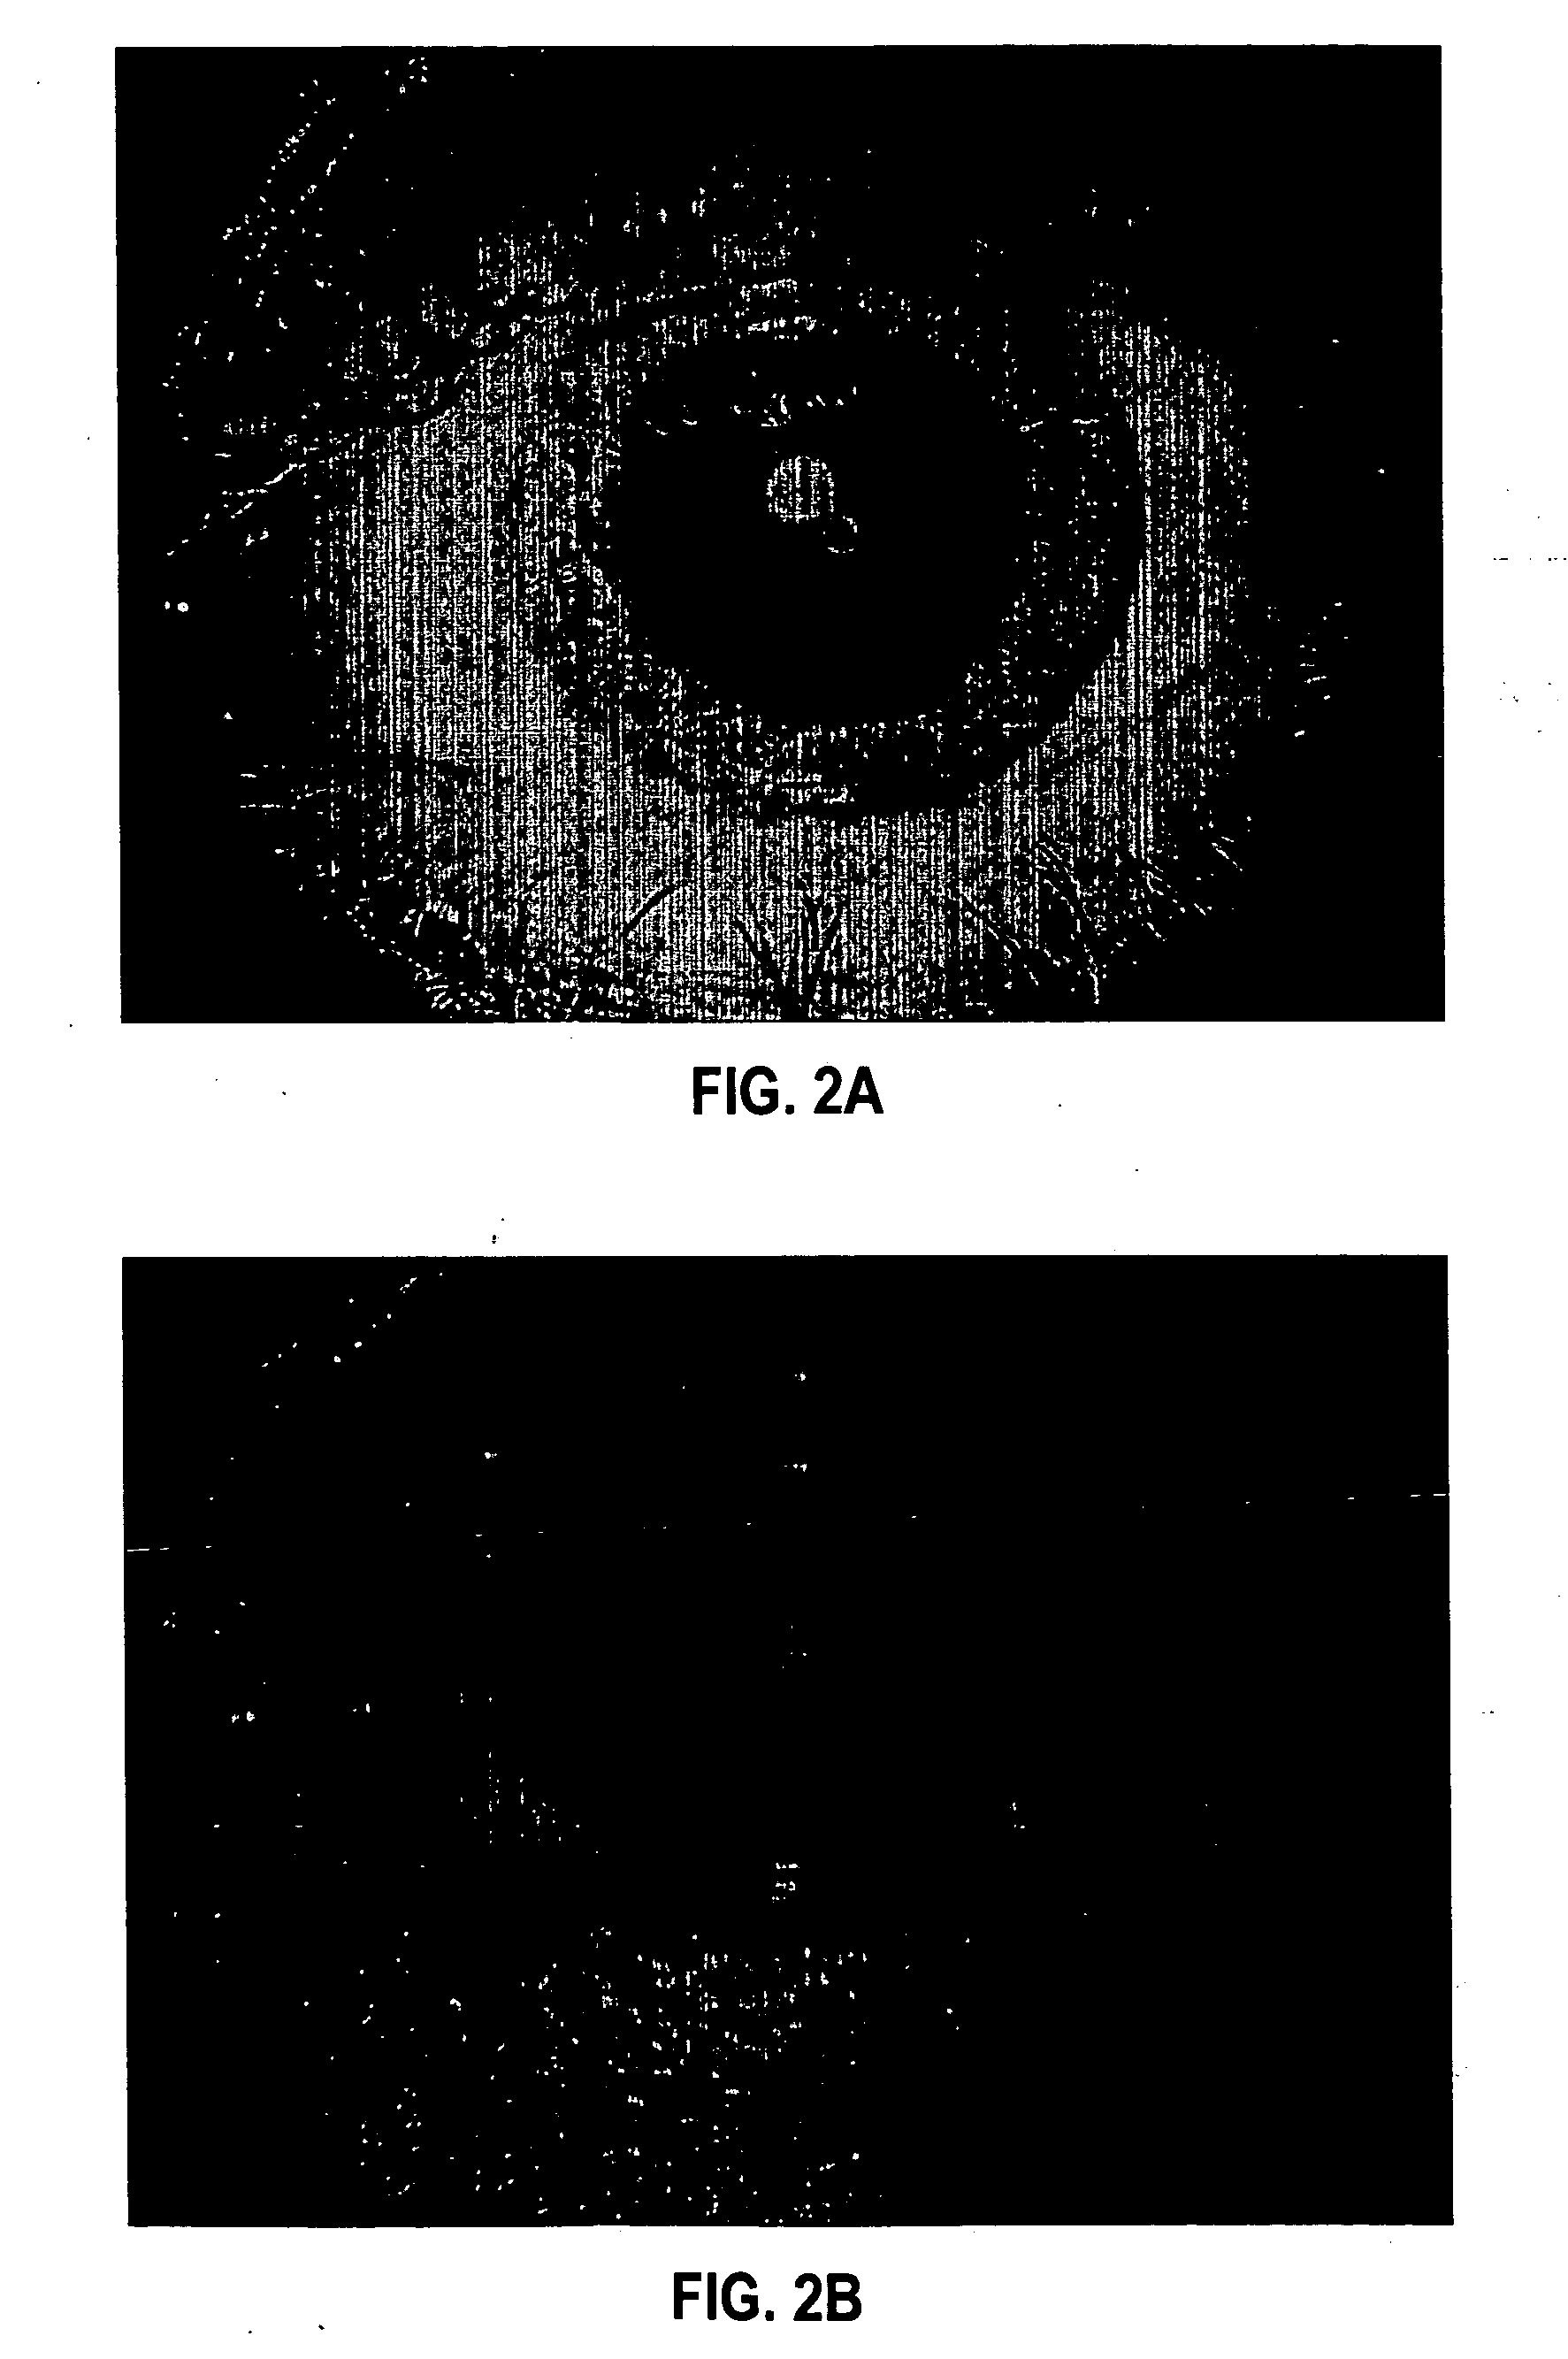 Formulation and method for administration of ophthalmologically active agents